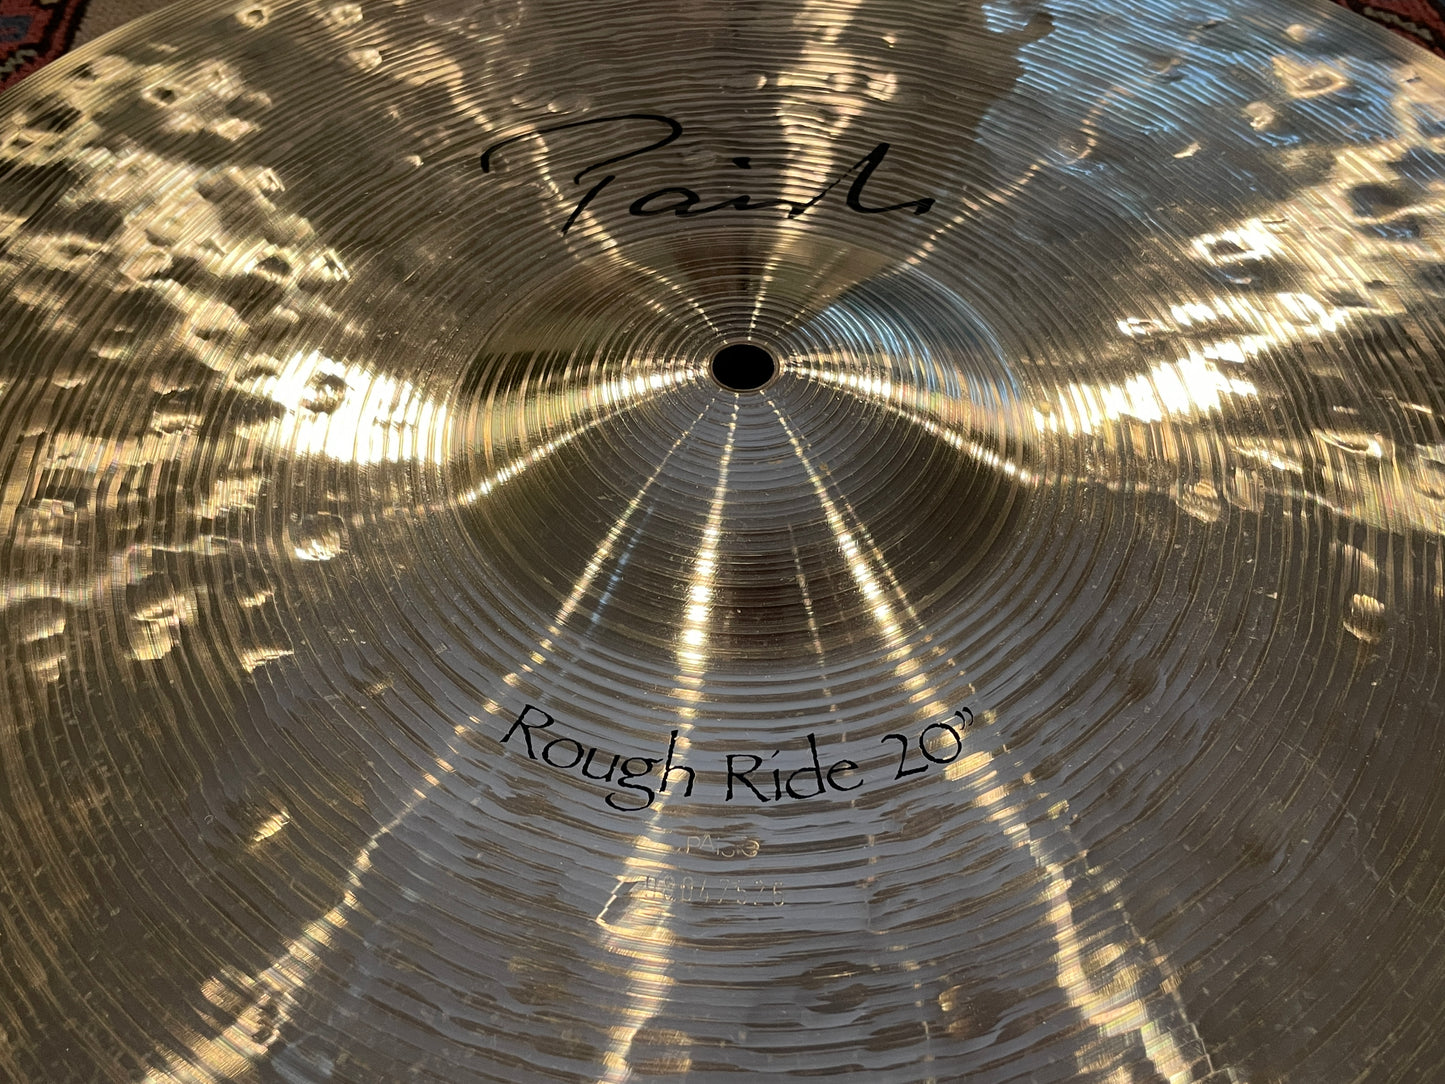 20" Paiste Signature Rough Ride Cymbal 2328g *Video Demo*